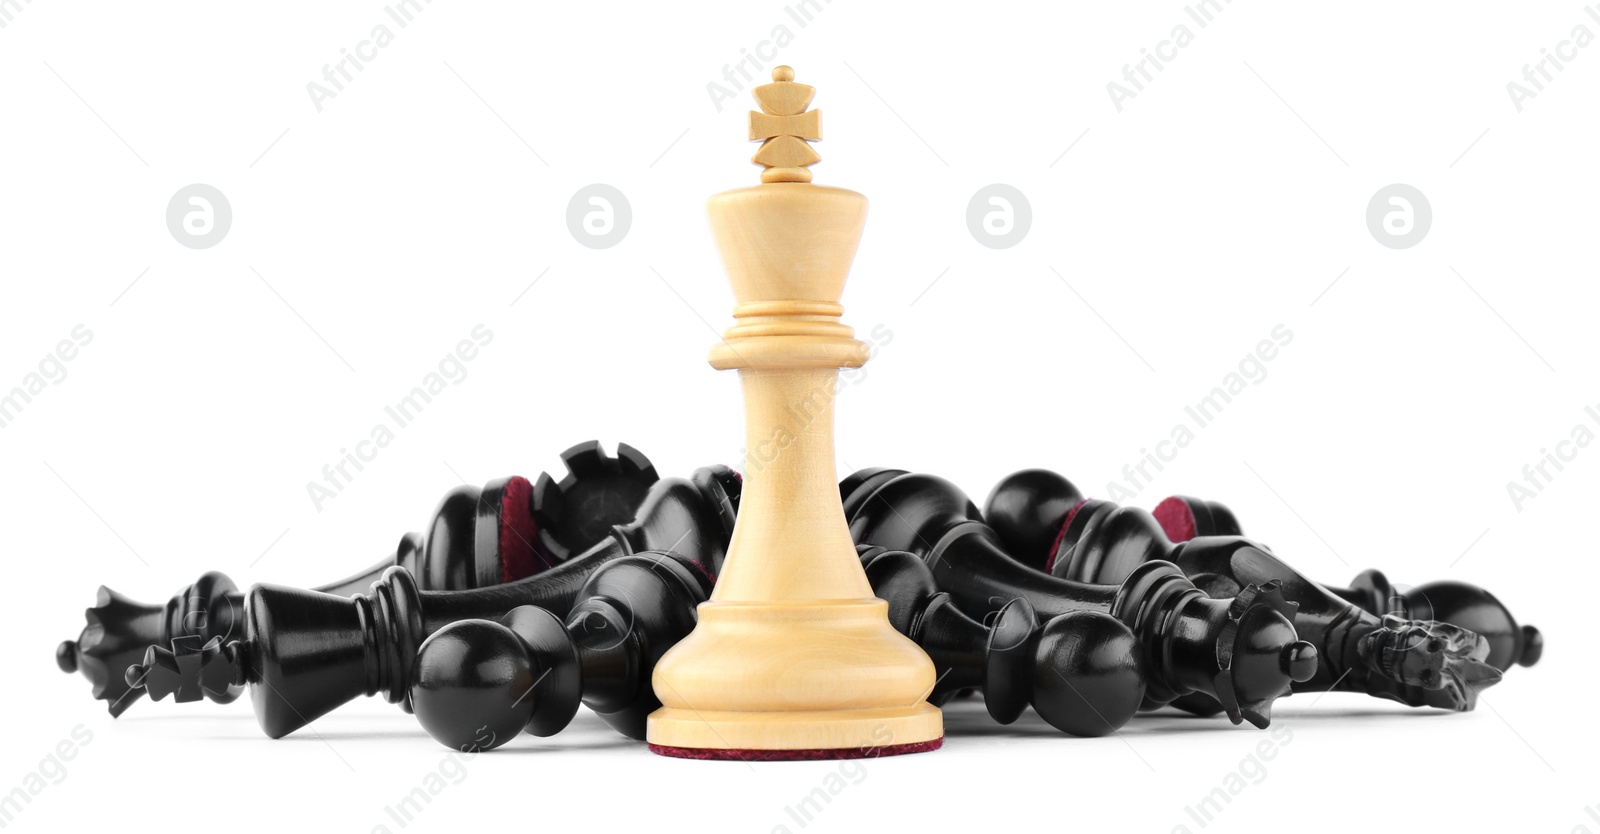 Photo of King among fallen chess pieces on white background